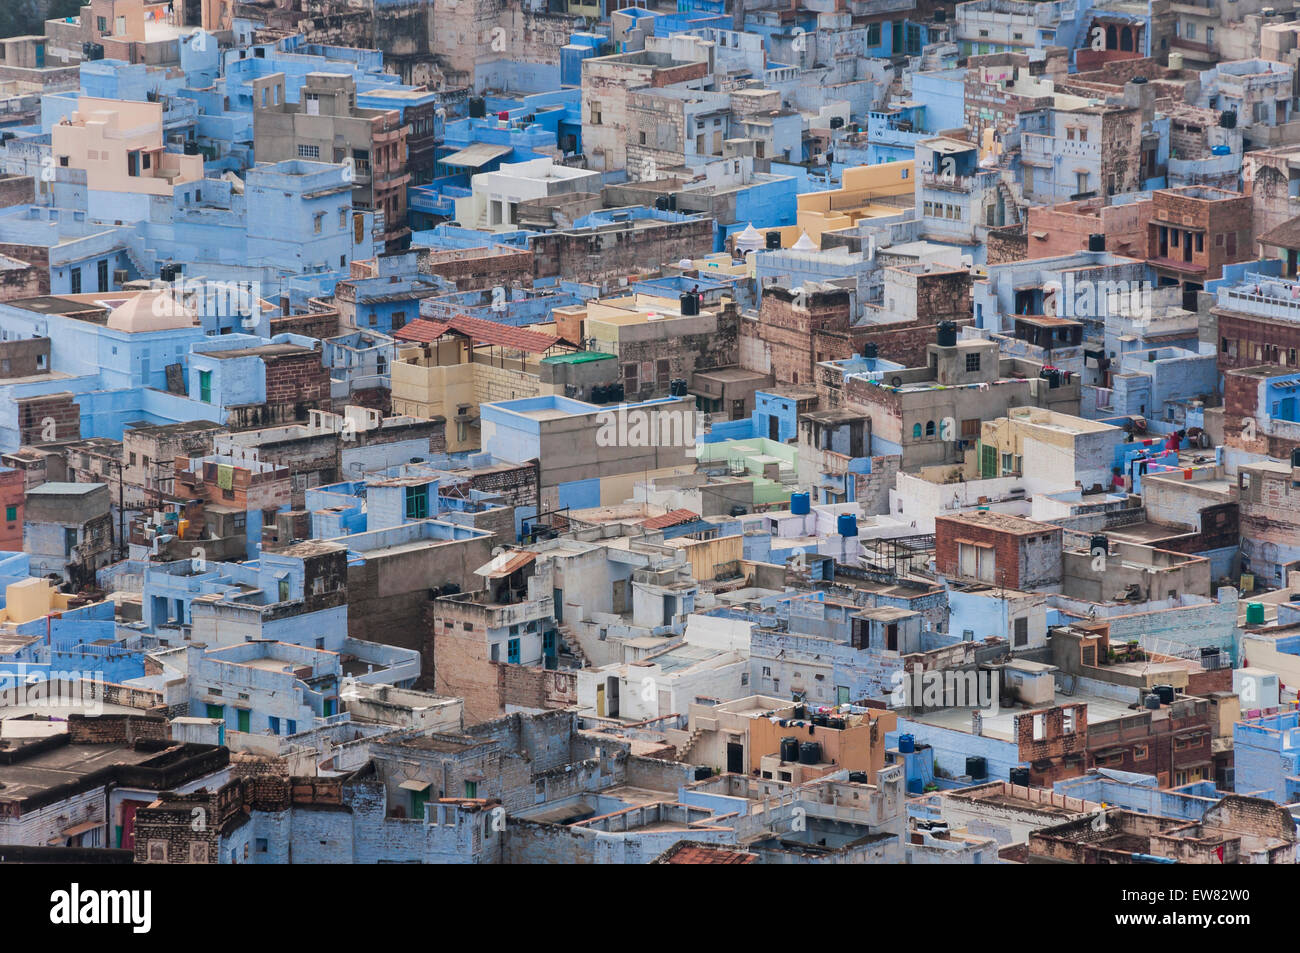 Arial view of houses in Jodhpur city, Rajasthan, India. Stock Photo